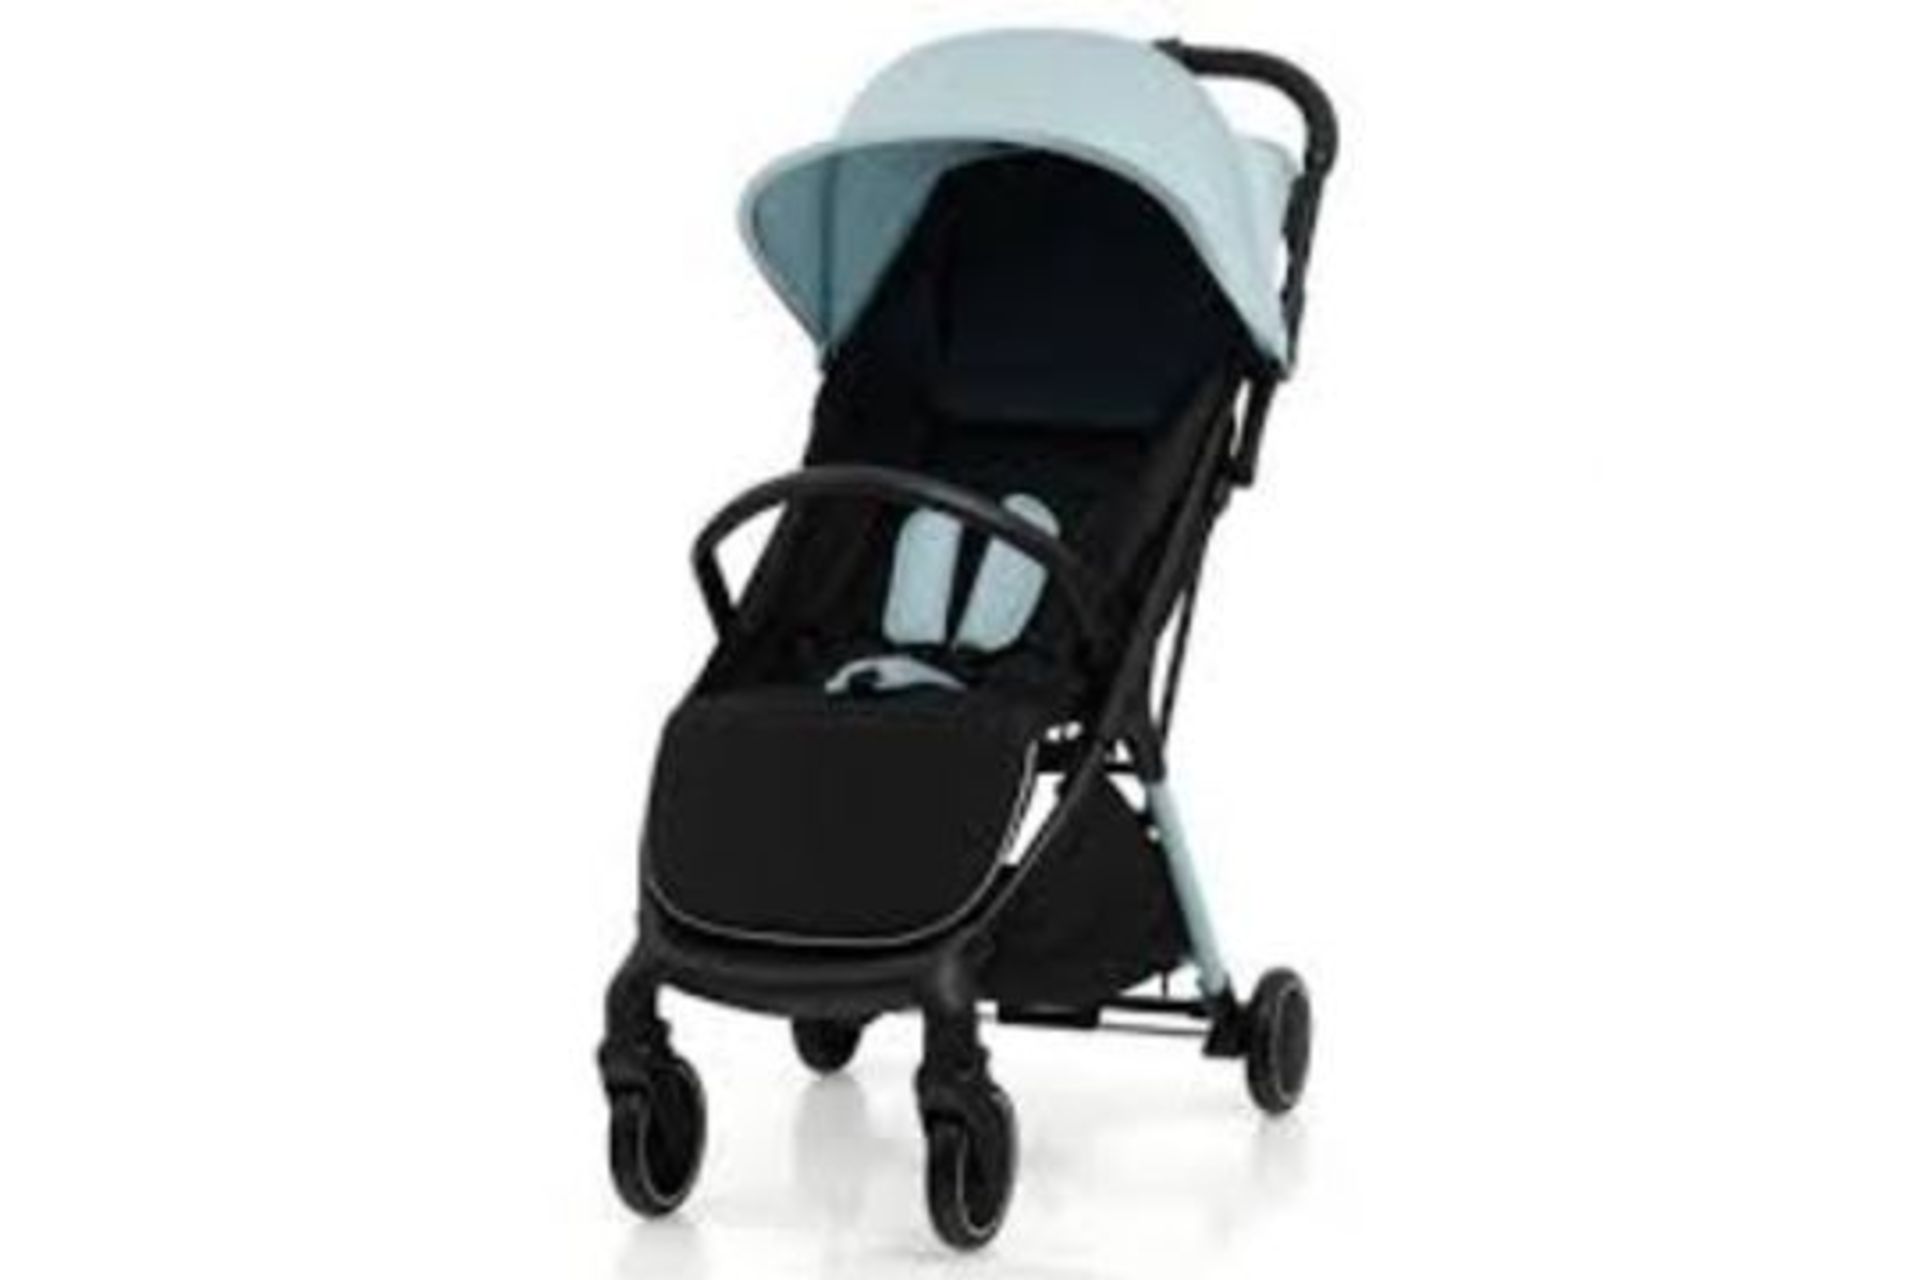 Lightweight Baby Stroller with Detachable Seat Cover. - R14.14